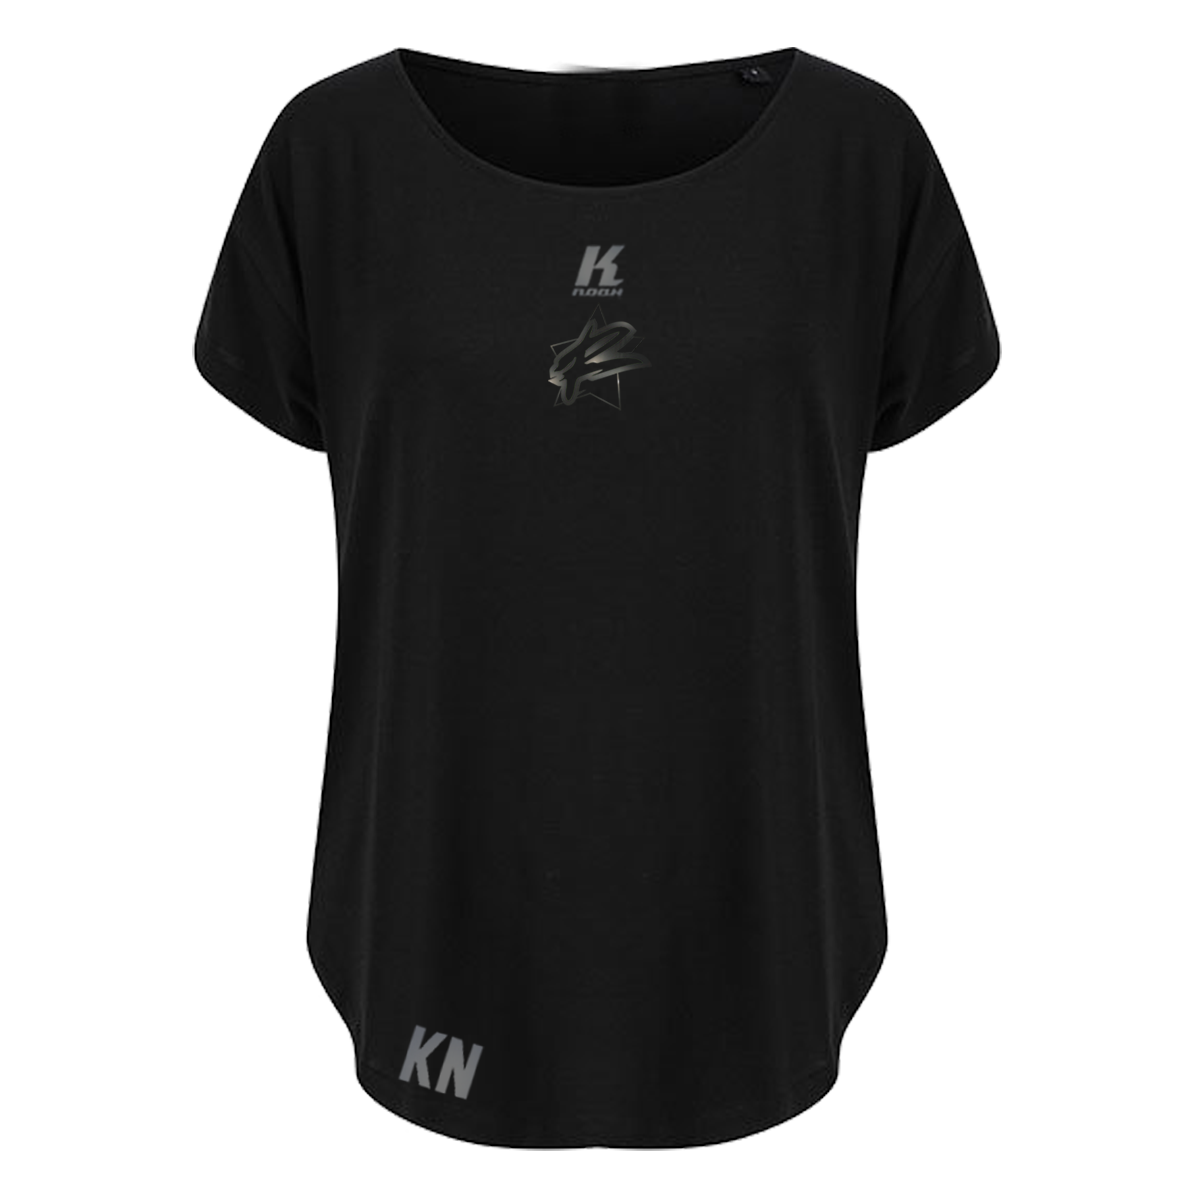 Rebels "Blackline" Womens Sports Tee TL527 with Initials/Playernumber